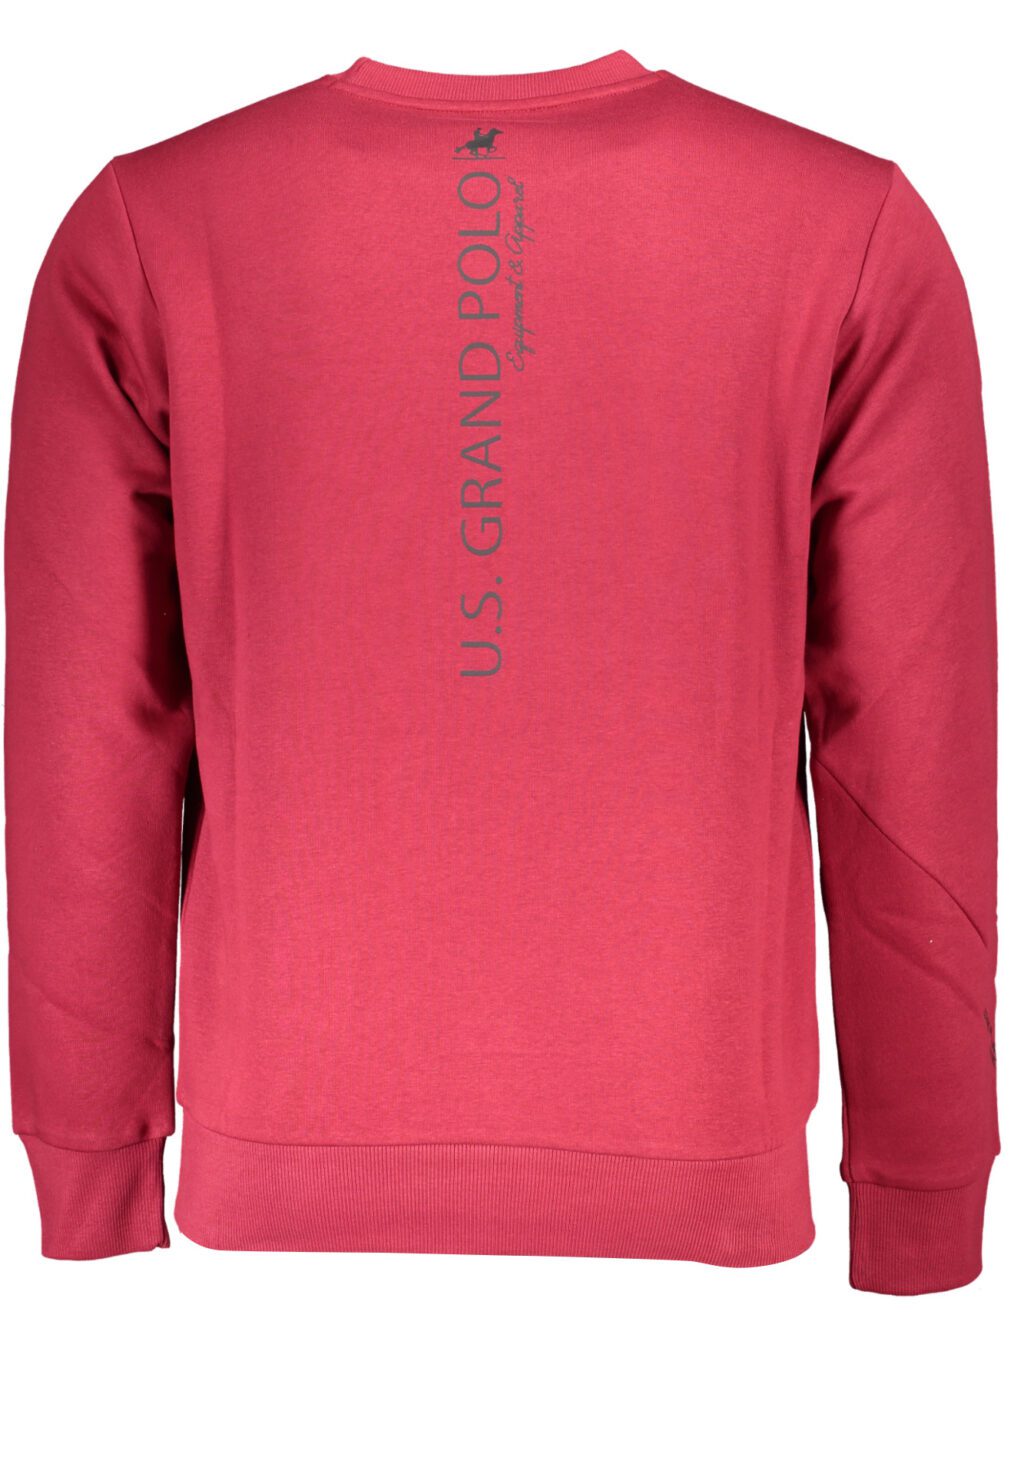 US GRAND POLO MEN'S RED ZIP-OUT SWEATSHIRT USF895_ROROSSO